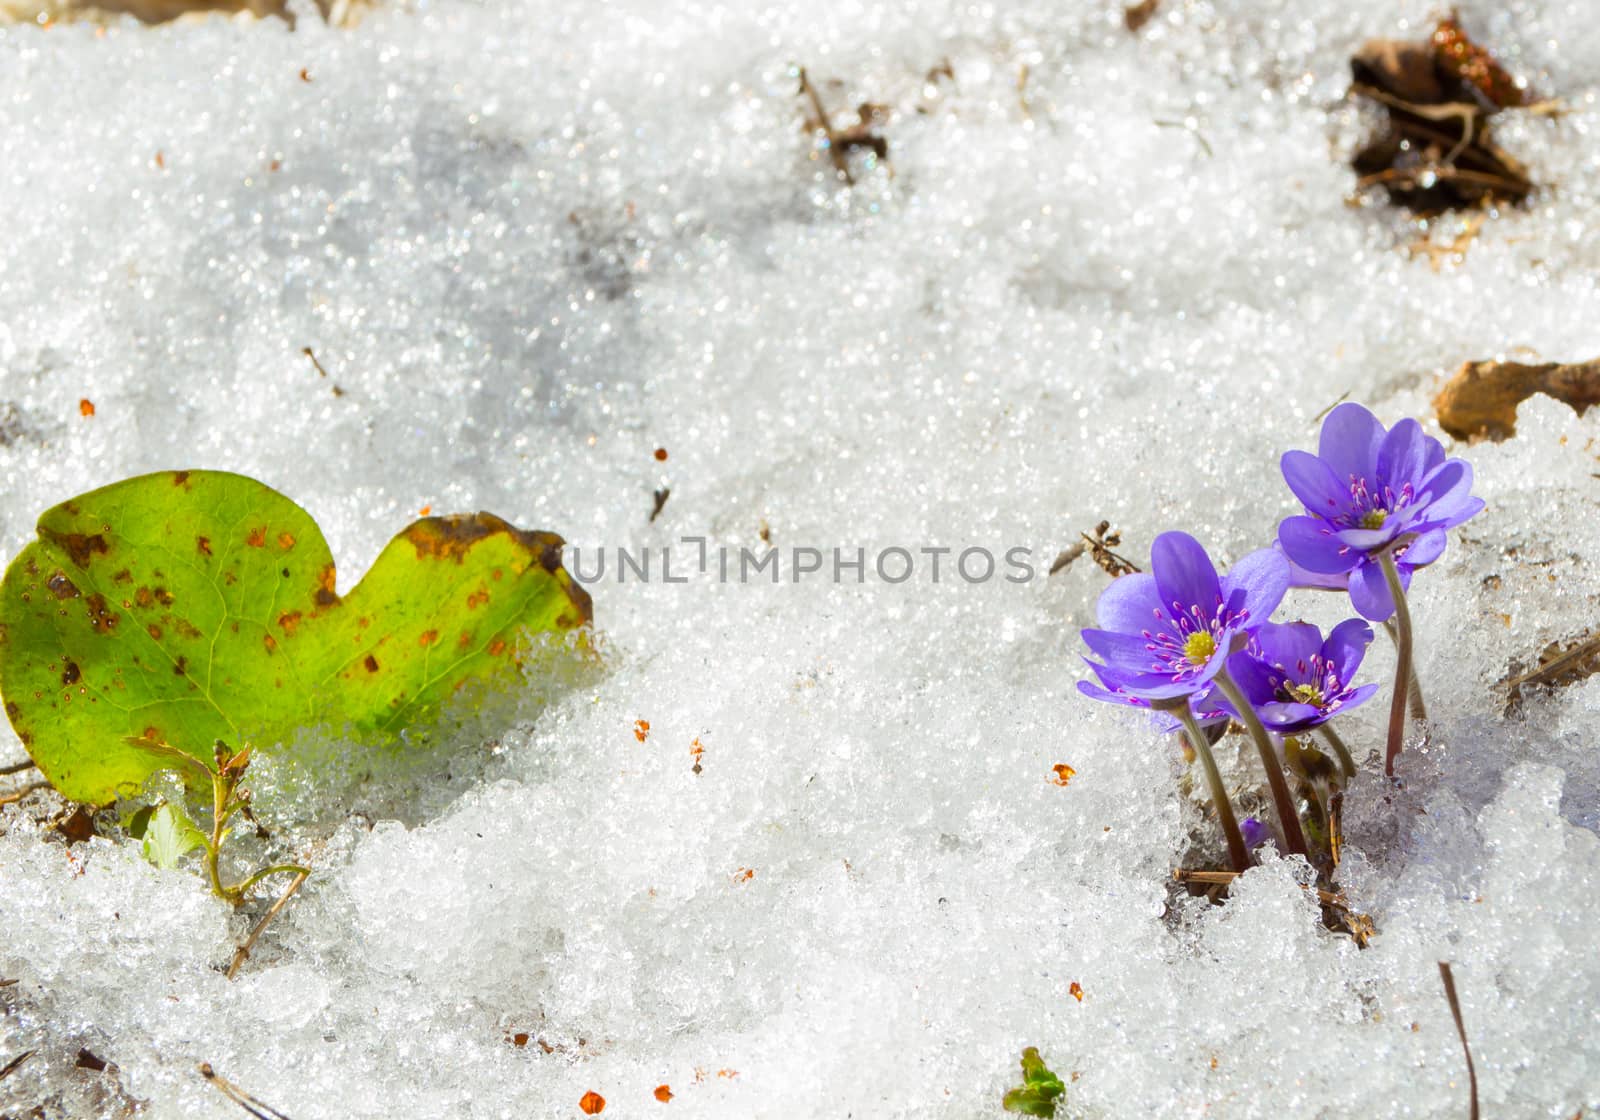 The first spring flowers in the melting snow by aleksaskv